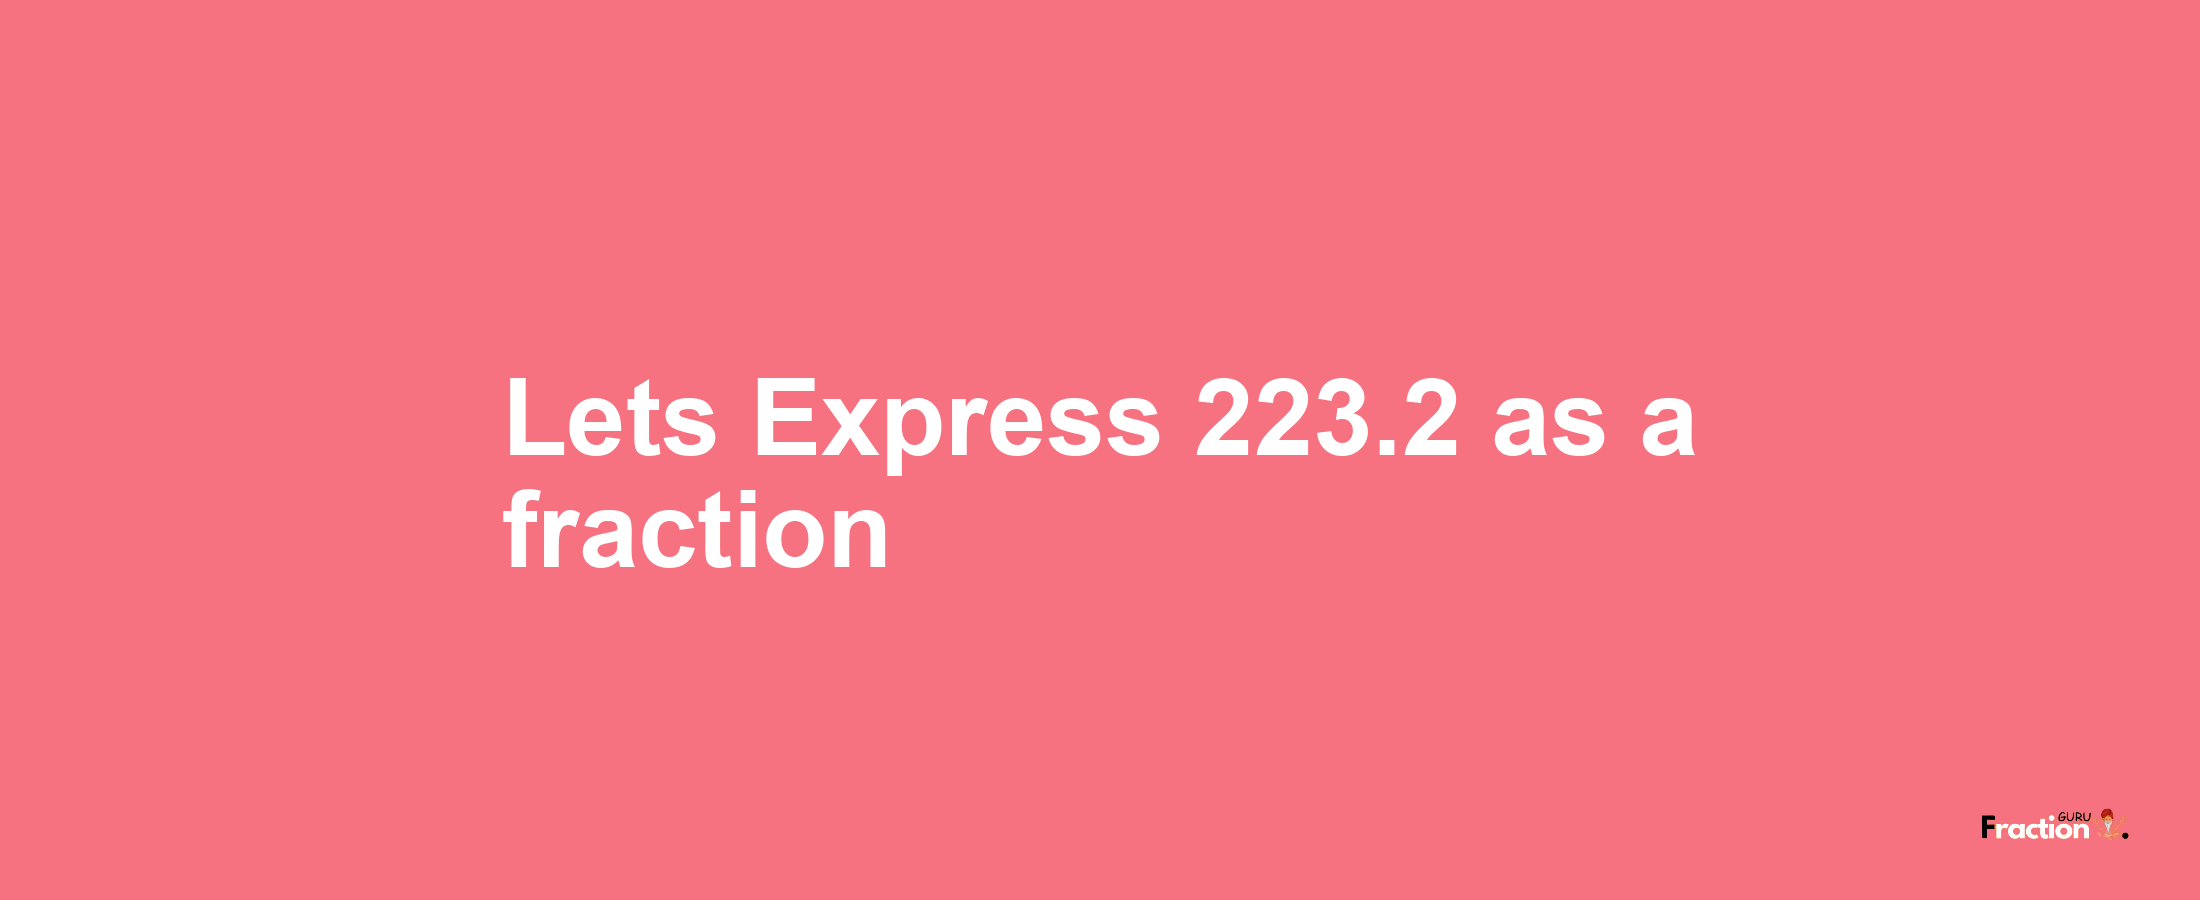 Lets Express 223.2 as afraction